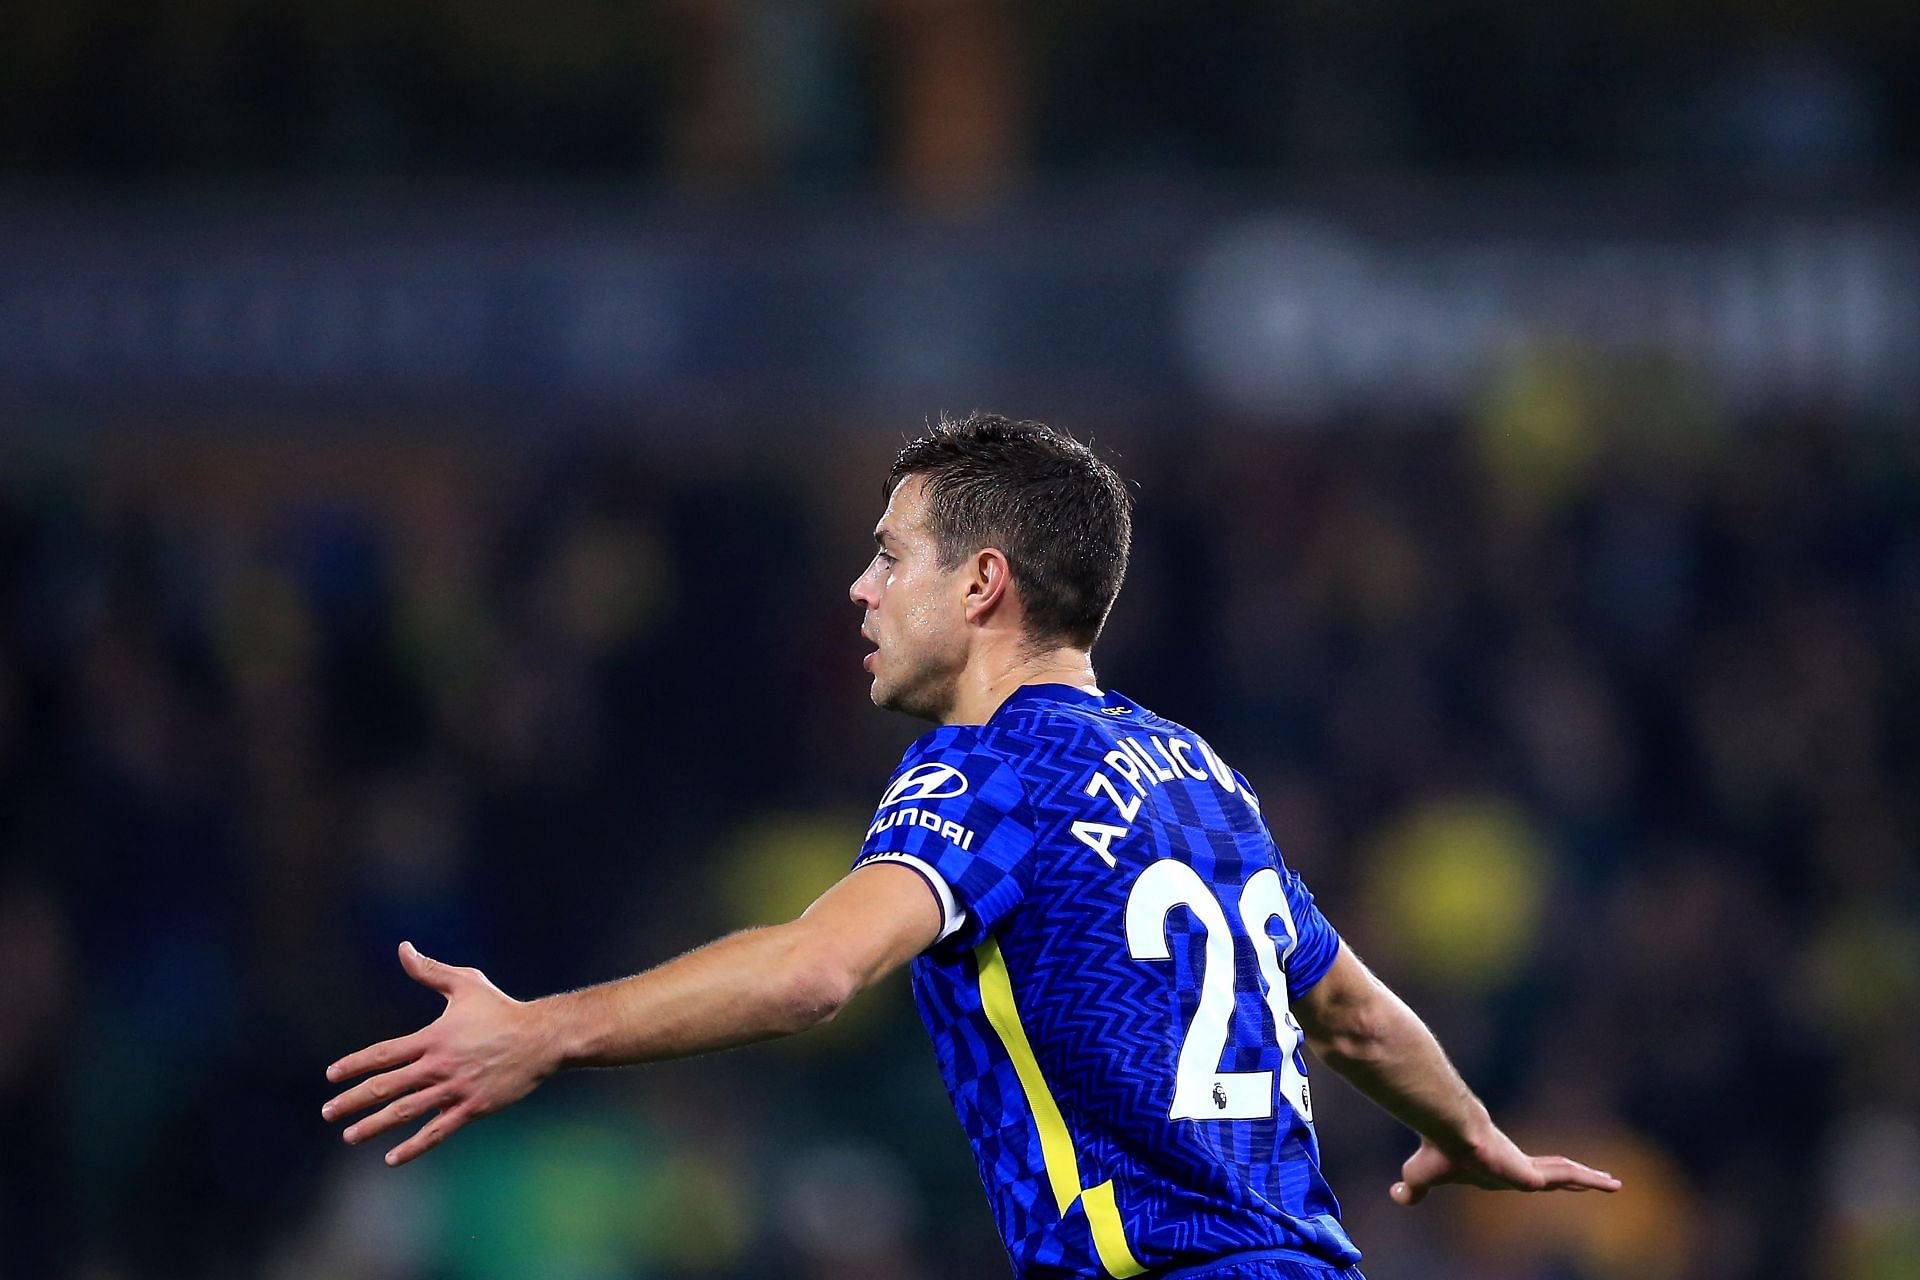 Azpilicueta played as left-wing-back against Real Madrid